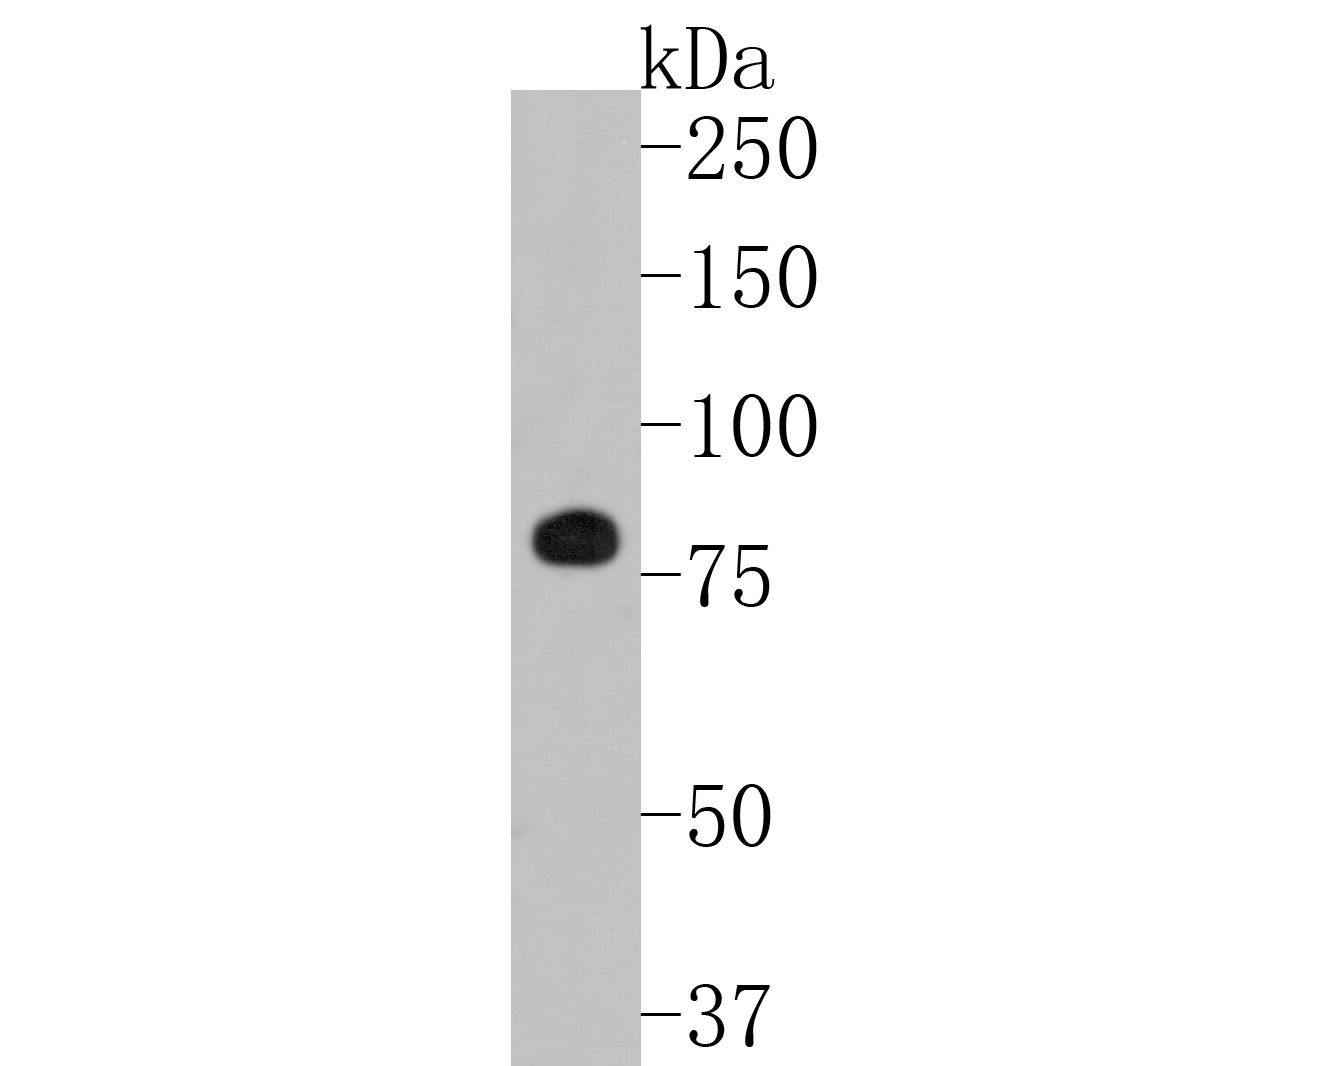 Western blot analysis of EGR1 on SW480 cell lysates. Proteins were transferred to a PVDF membrane and blocked with 5% BSA in PBS for 1 hour at room temperature. The primary antibody (ET7111-41, 1/500) was used in 5% BSA at room temperature for 2 hours. Goat Anti-Rabbit IgG - HRP Secondary Antibody (HA1001) at 1:5,000 dilution was used for 1 hour at room temperature.